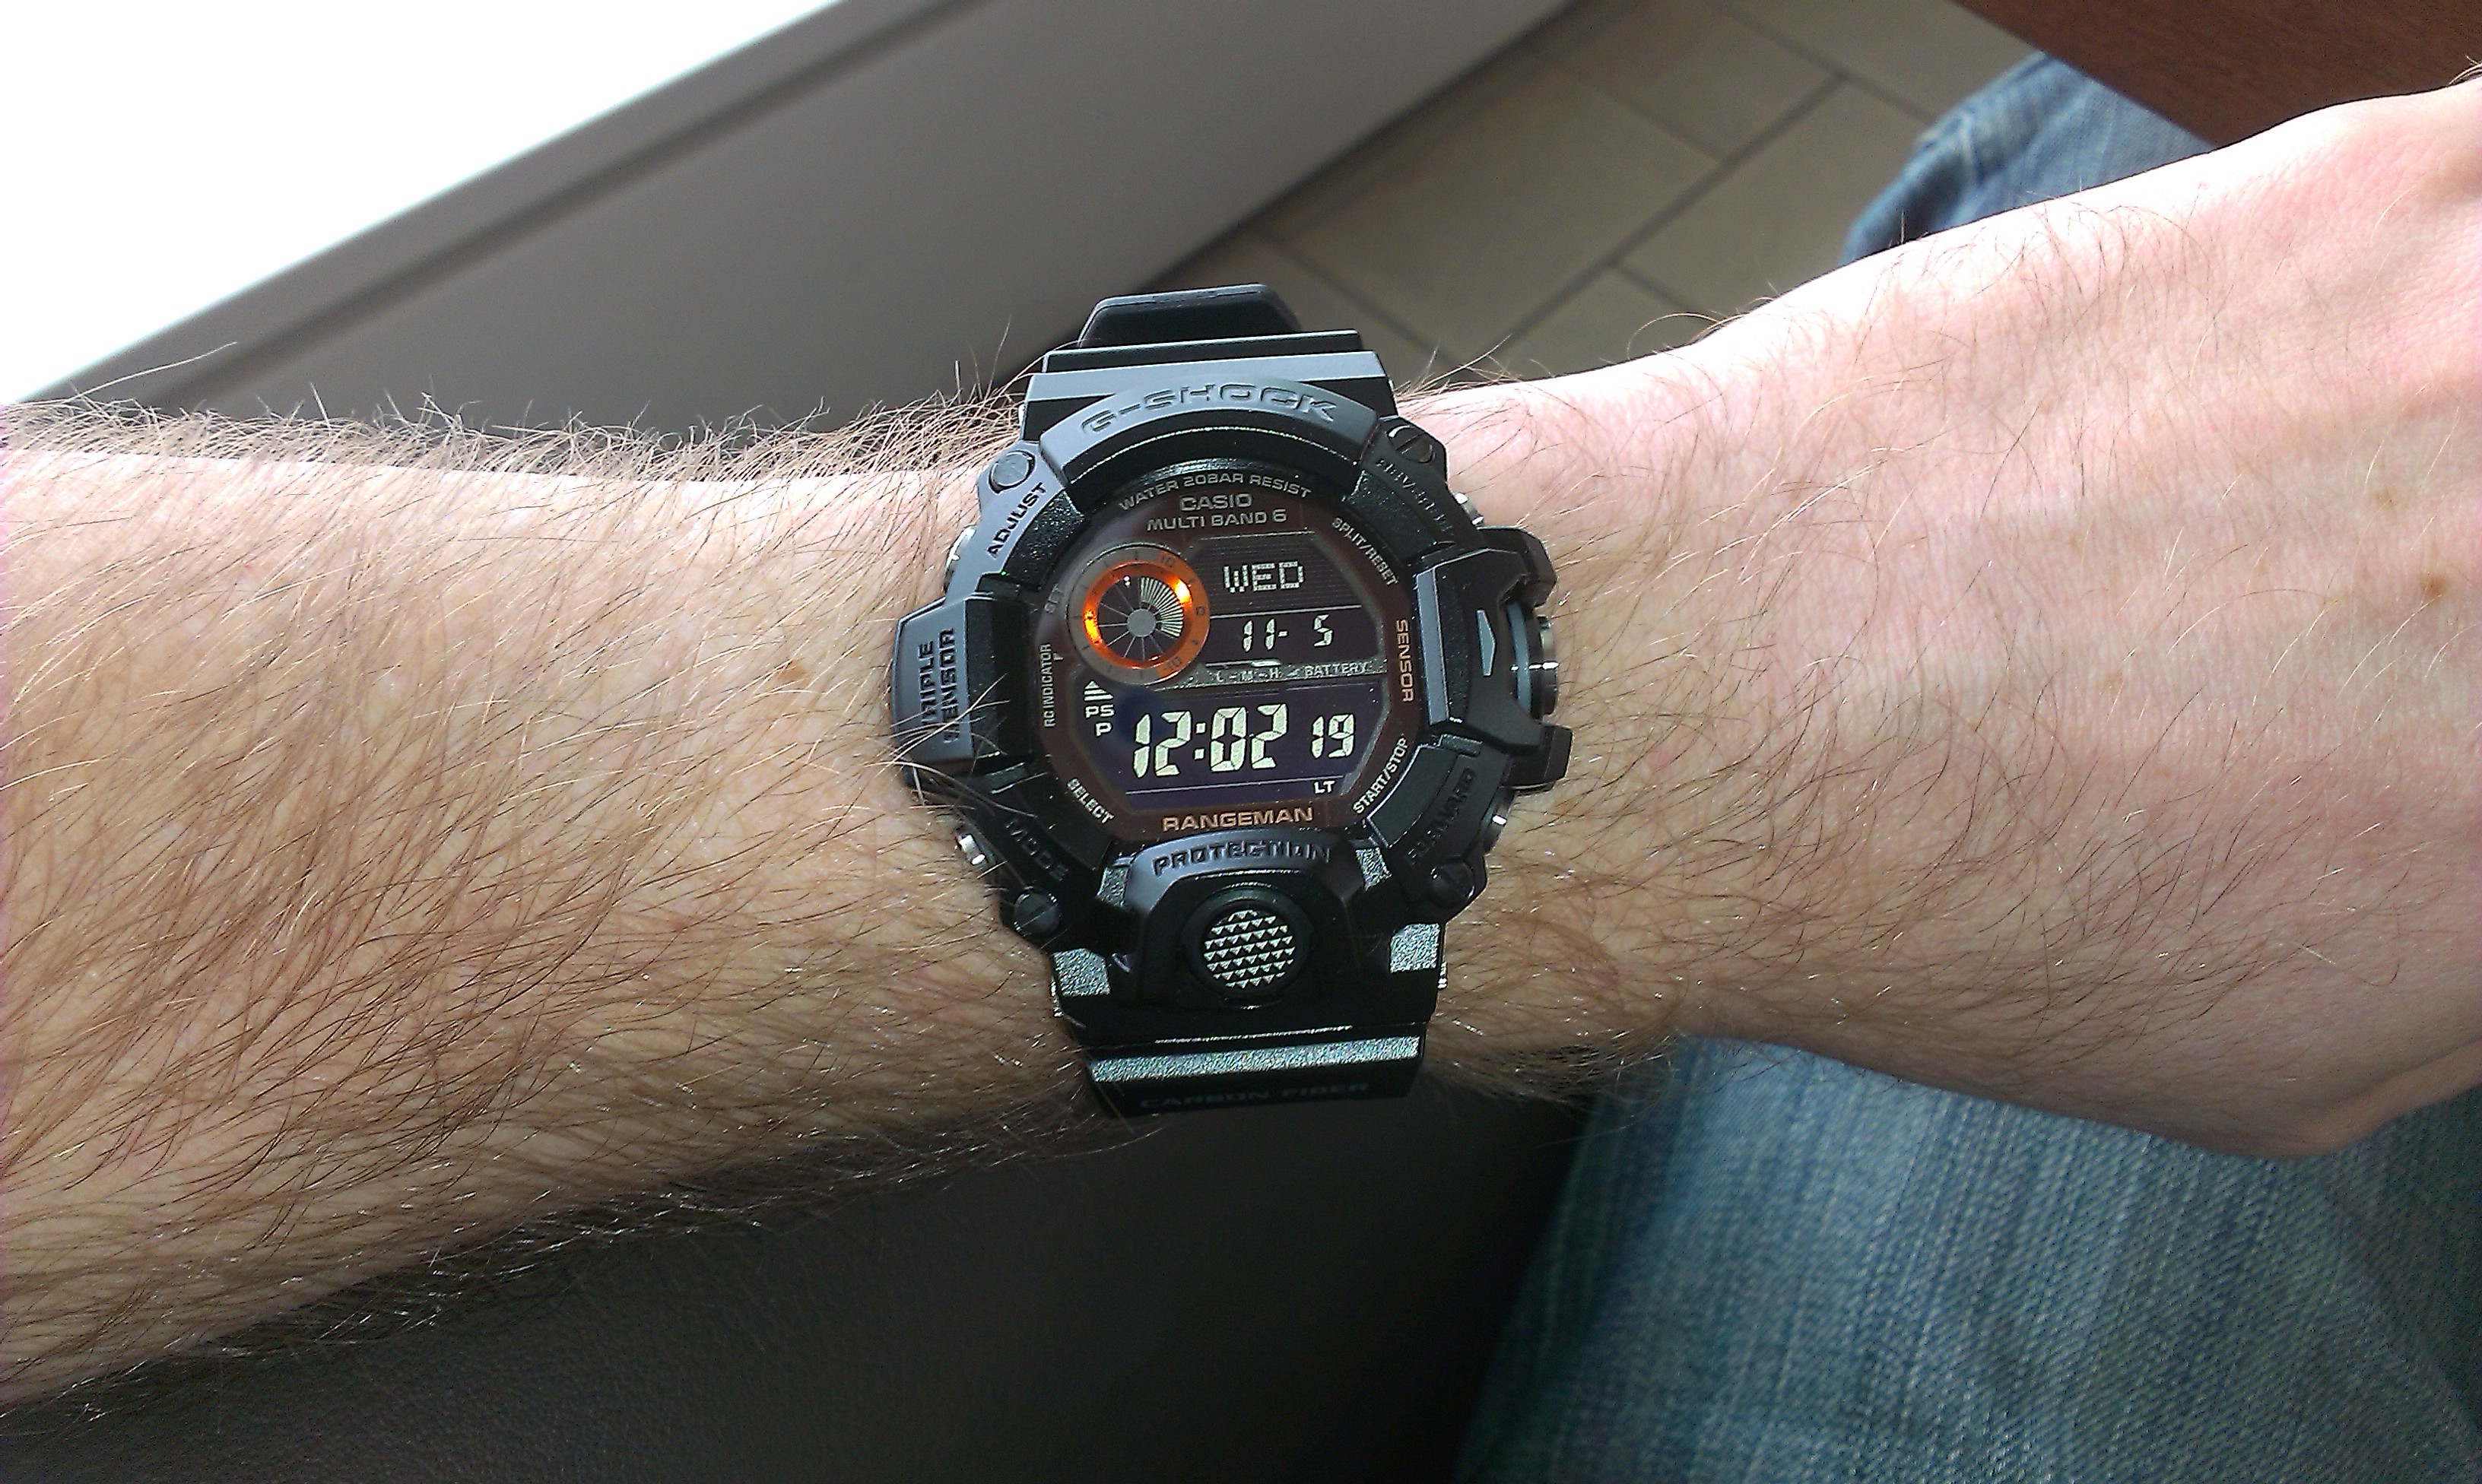 G-Shock Pawn - Page 218 - Watches - PistonHeads